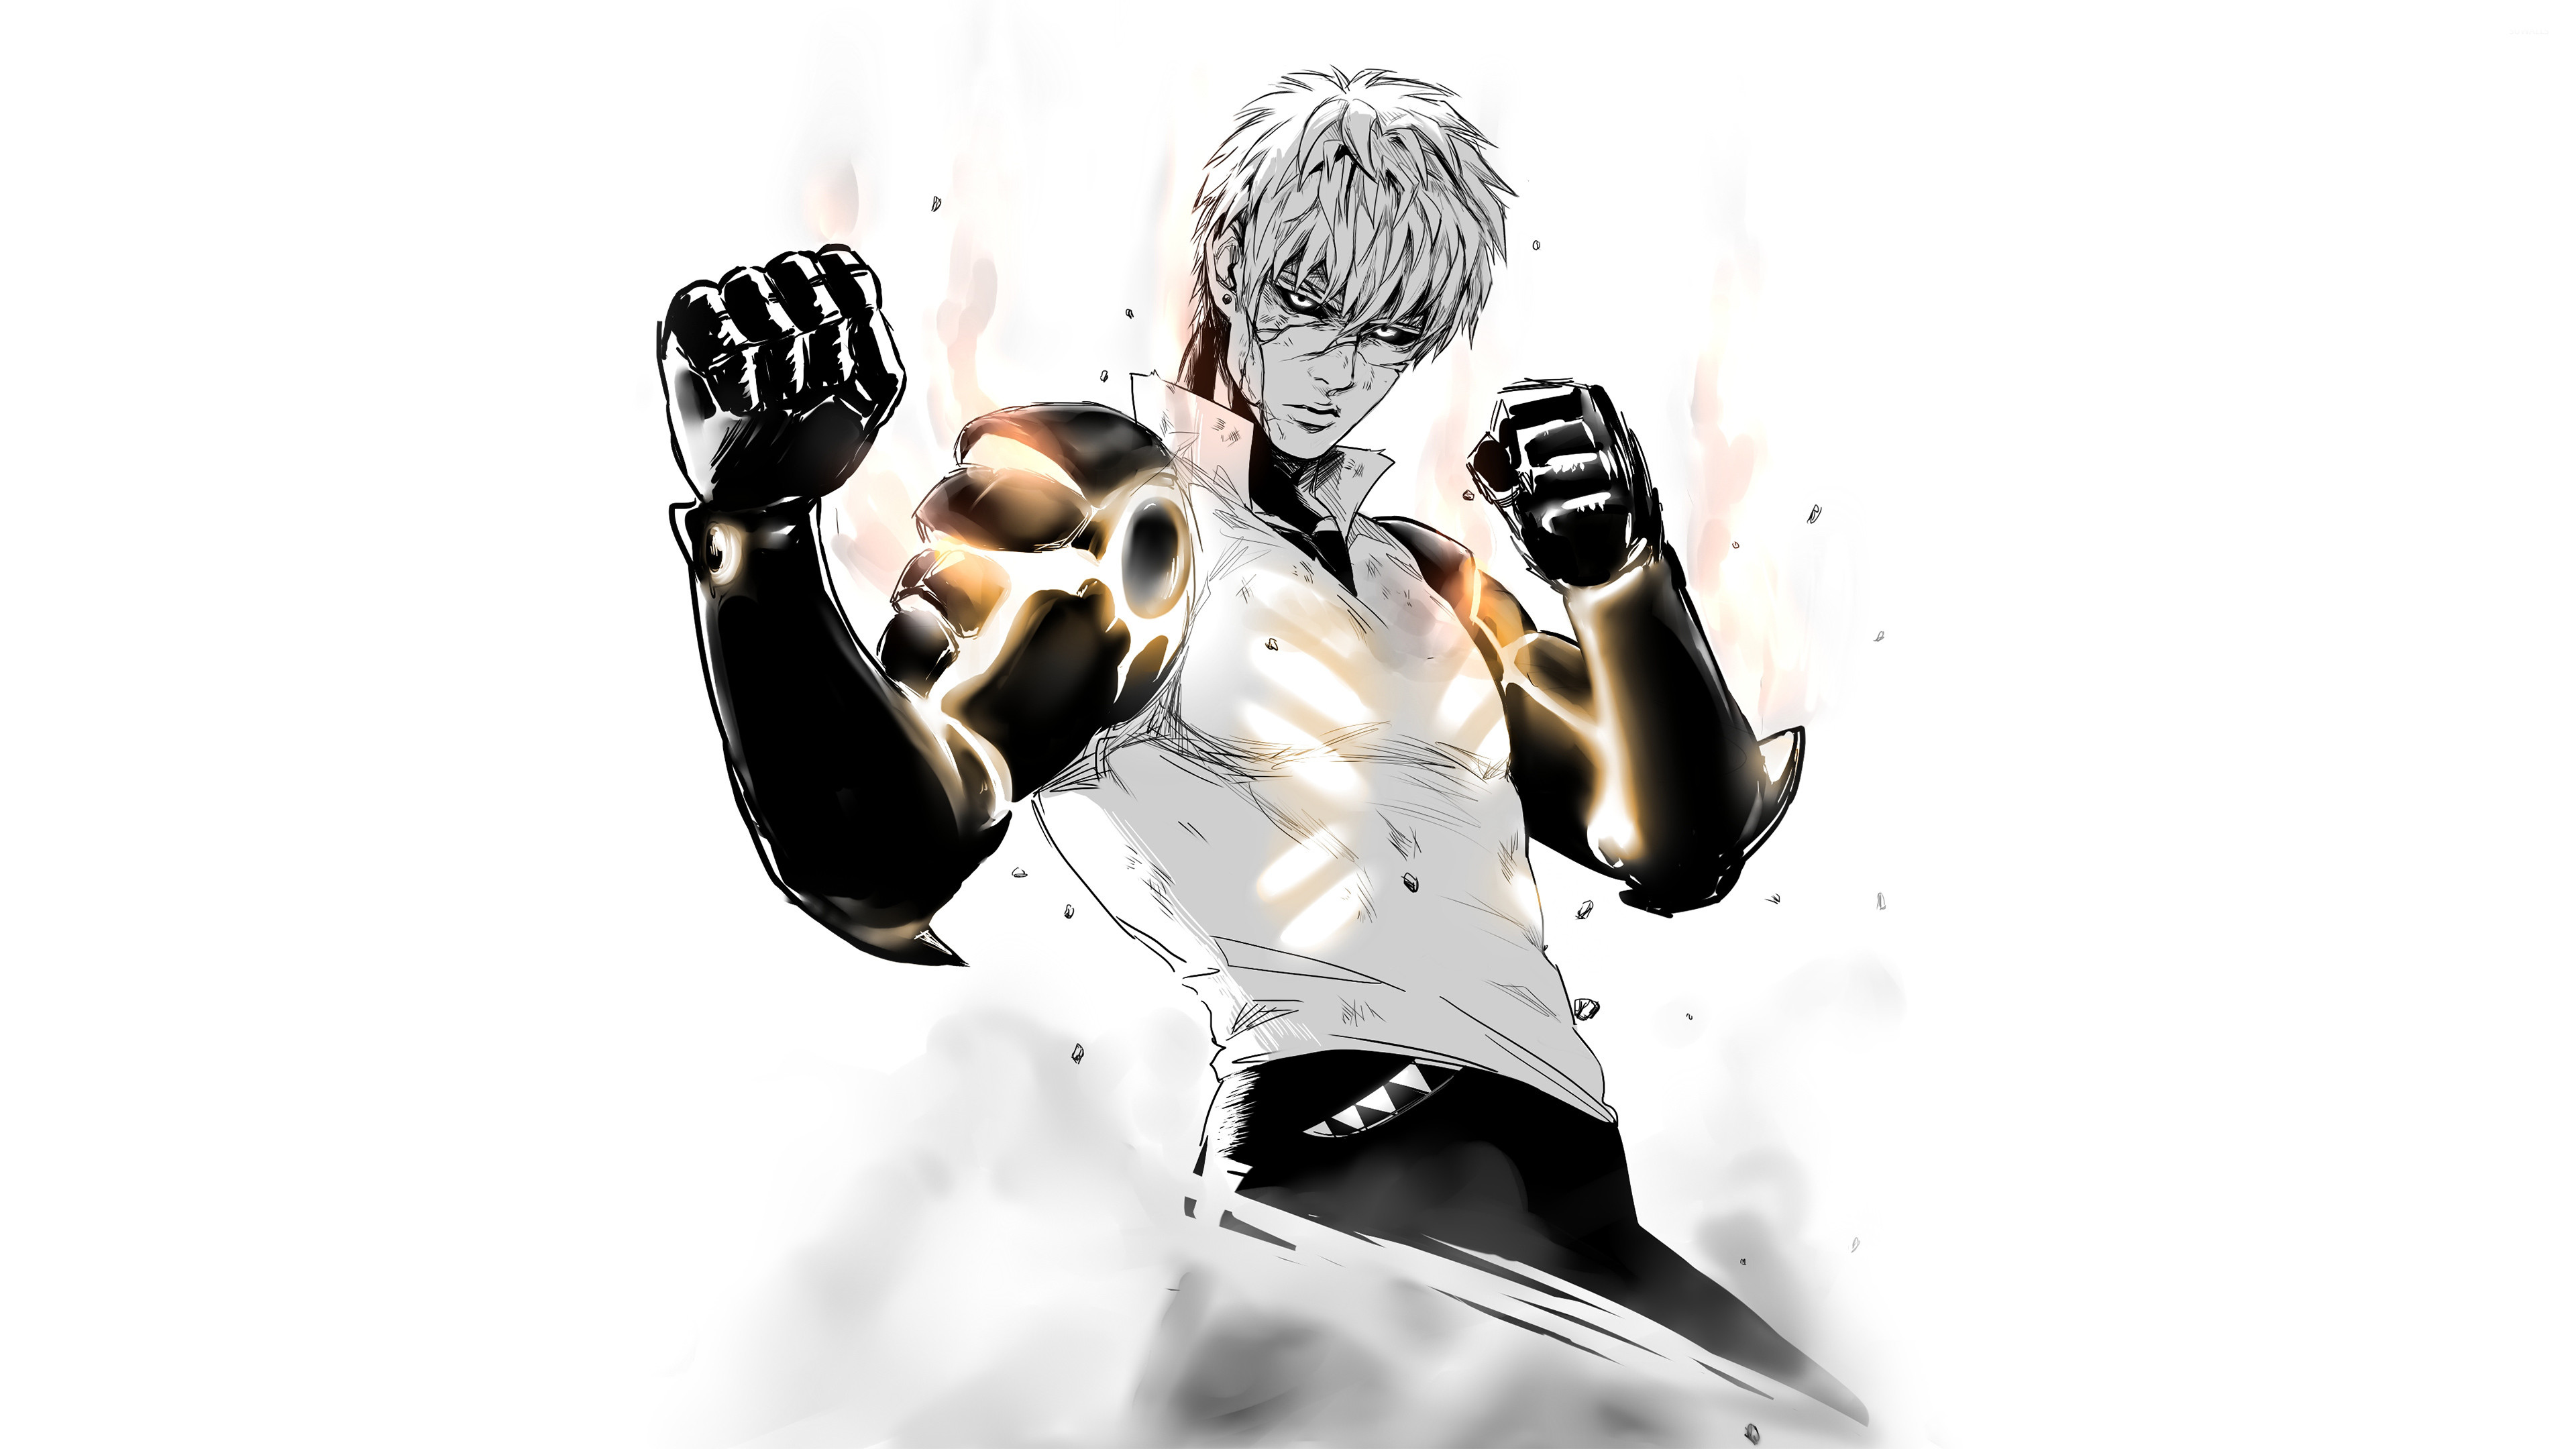 3840x2160 Genos ready to fight in One-Punch Man wallpaper